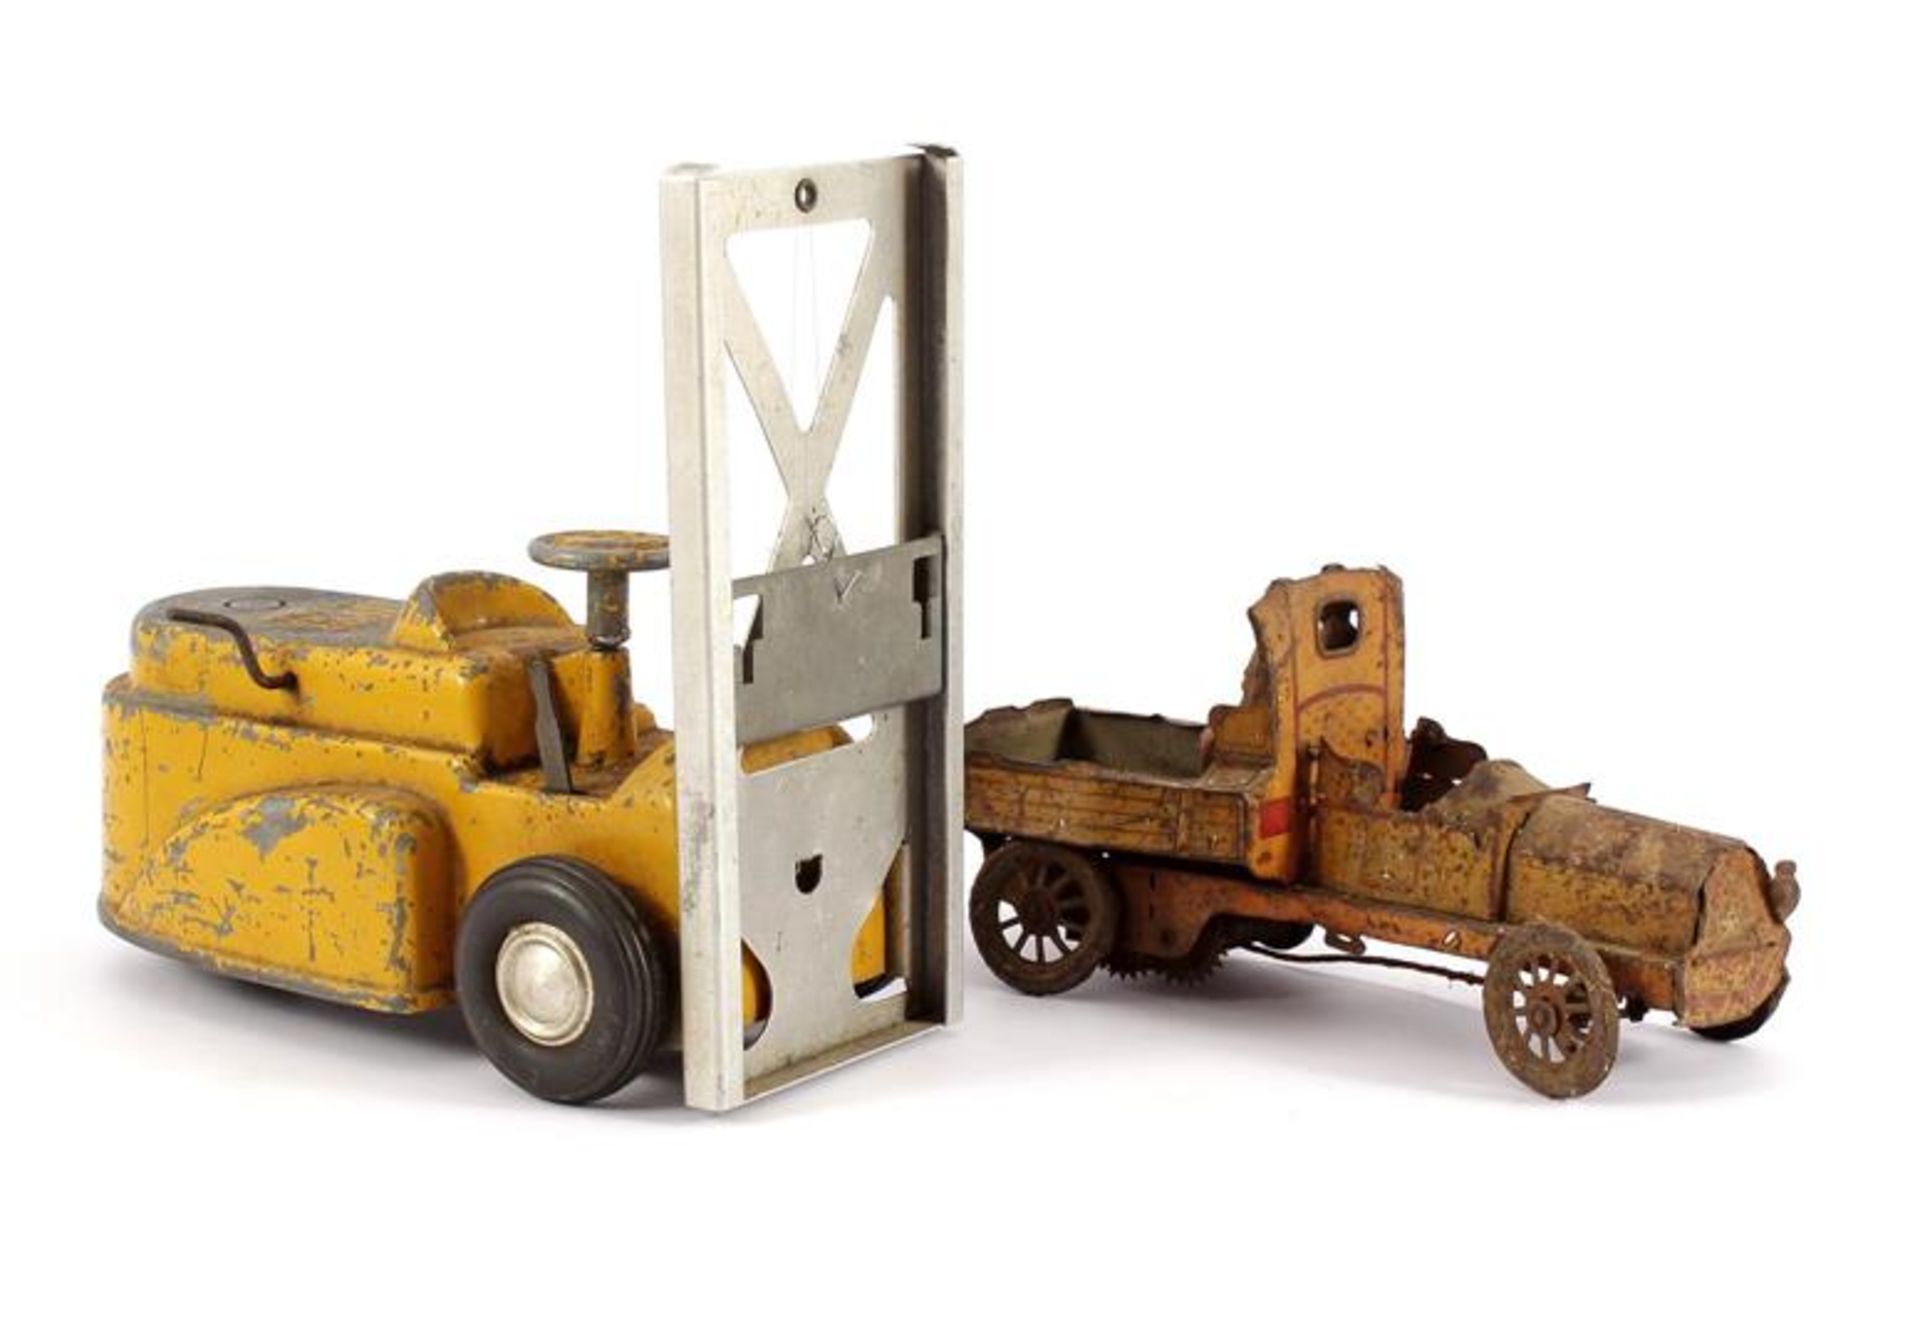 Little Giant Lift Truck and an old tin pickup truck